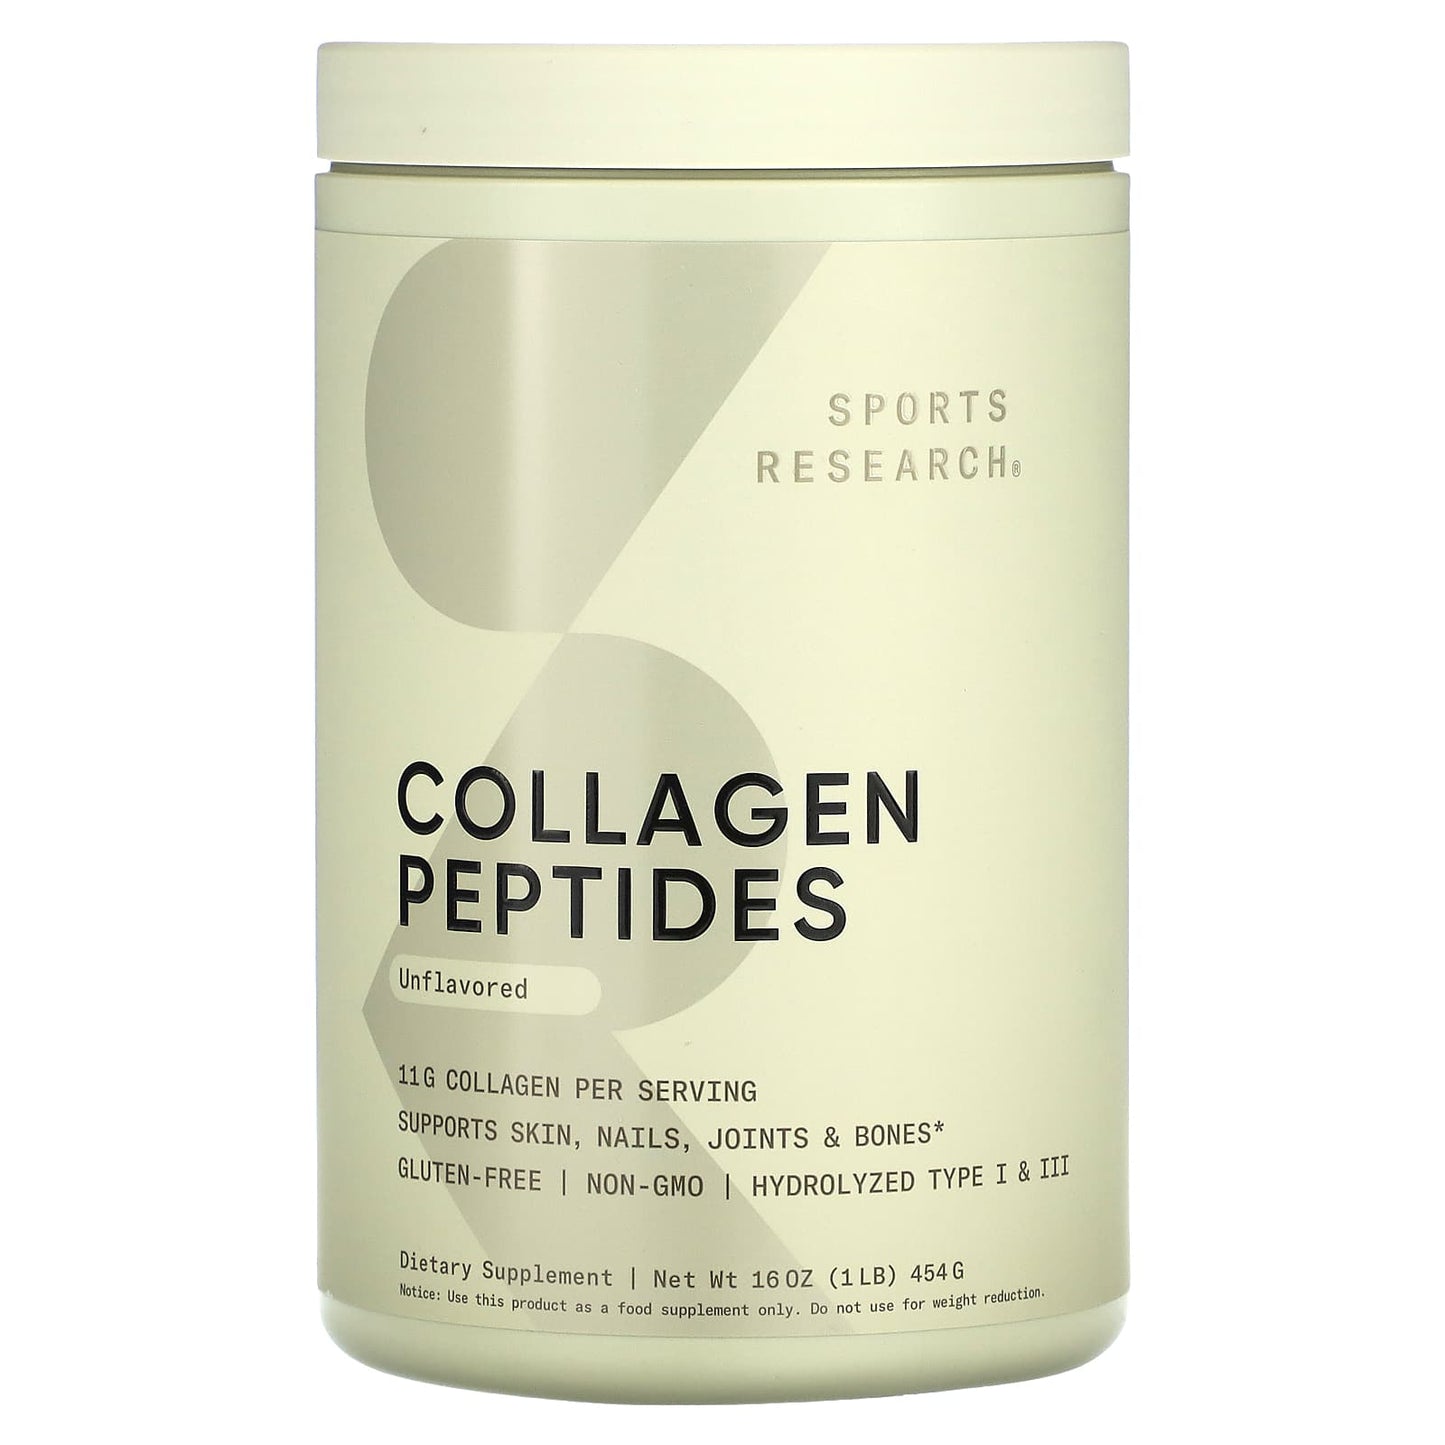 Sports Research-Collagen Peptides-Unflavored-1 lb (454 g)